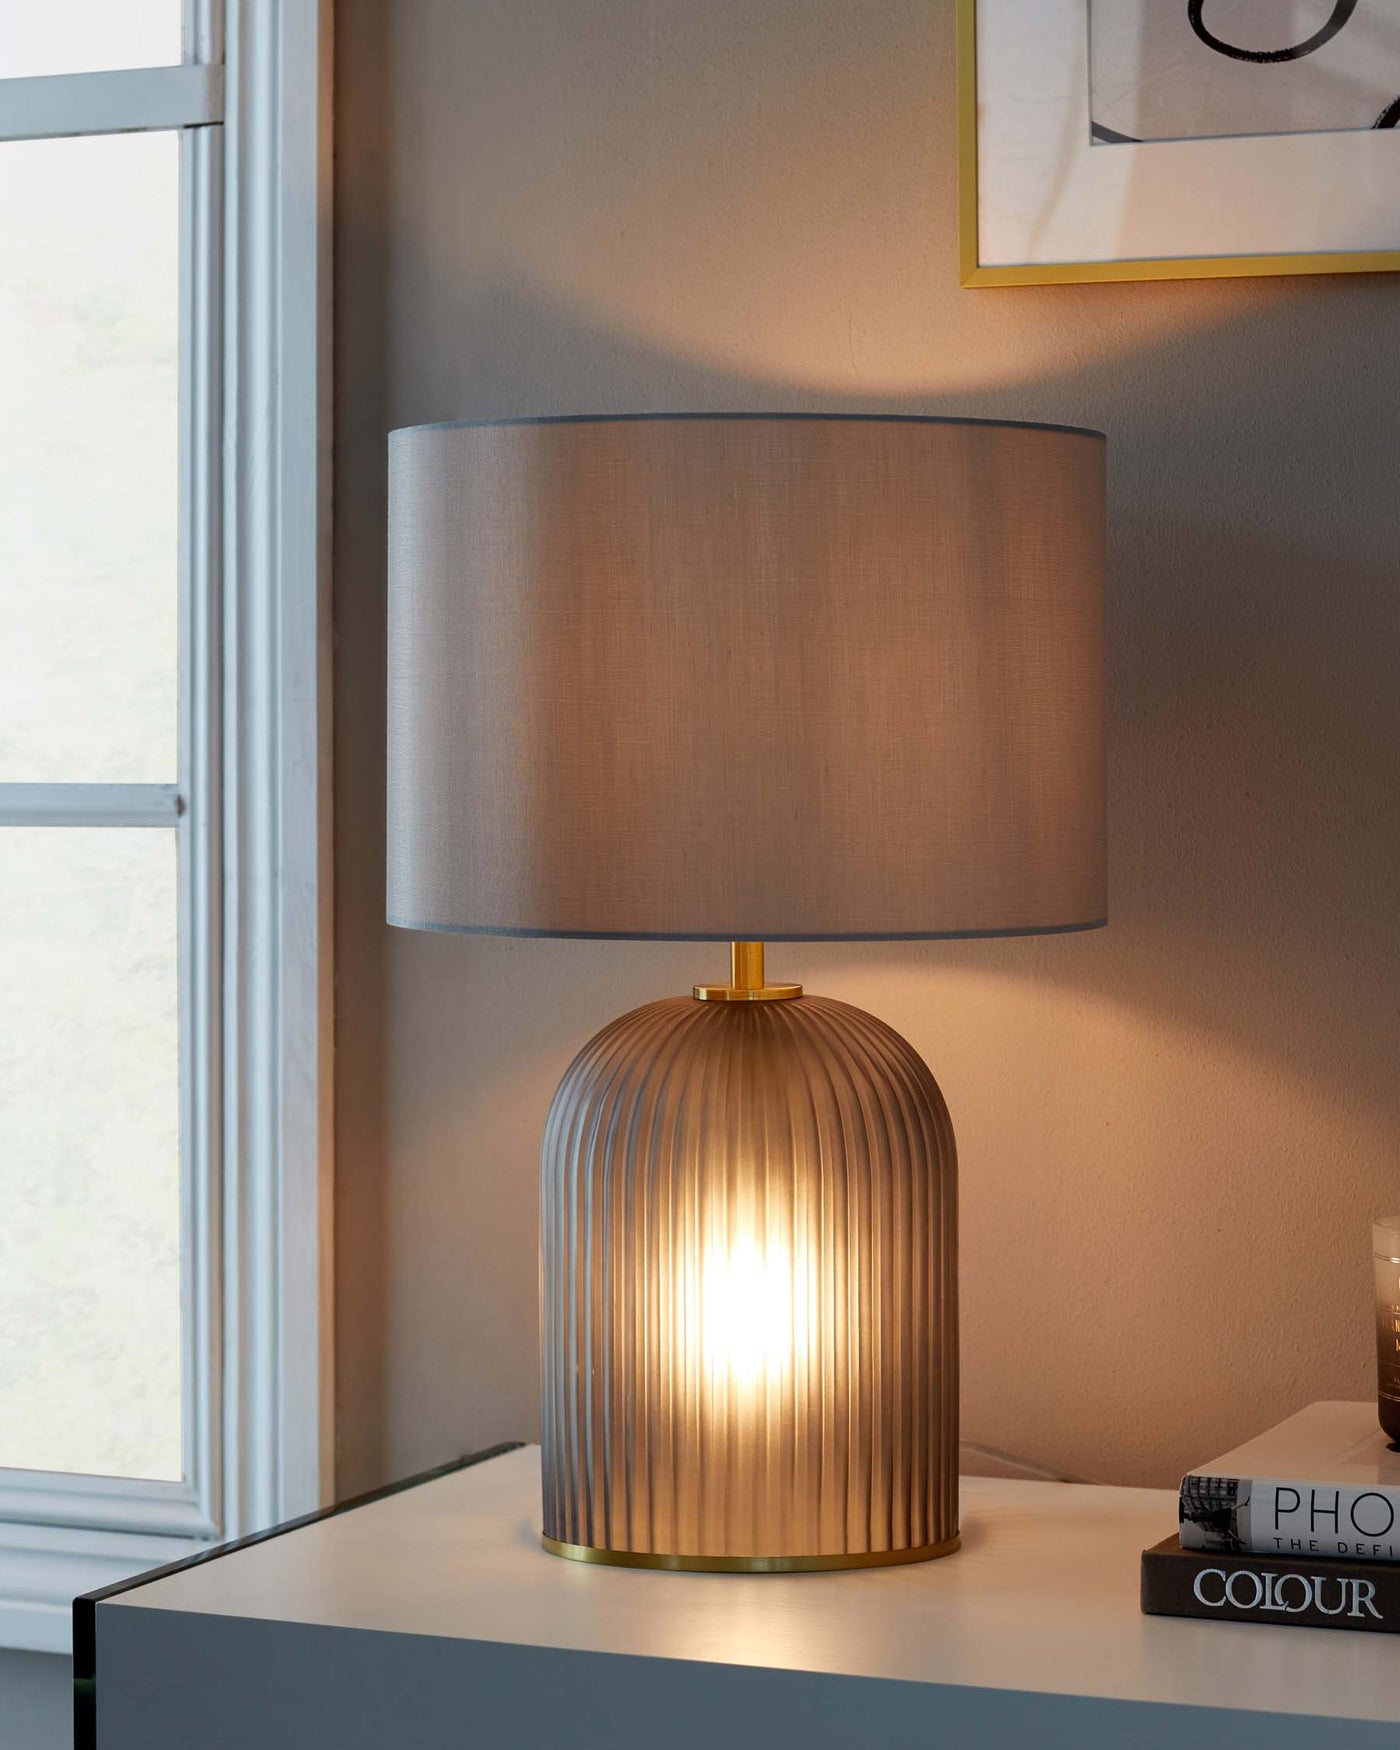 Table lamp with a cylindrical pleated metal base in a gold finish, topped with a broad cylindrical drum shade in a muted fabric.